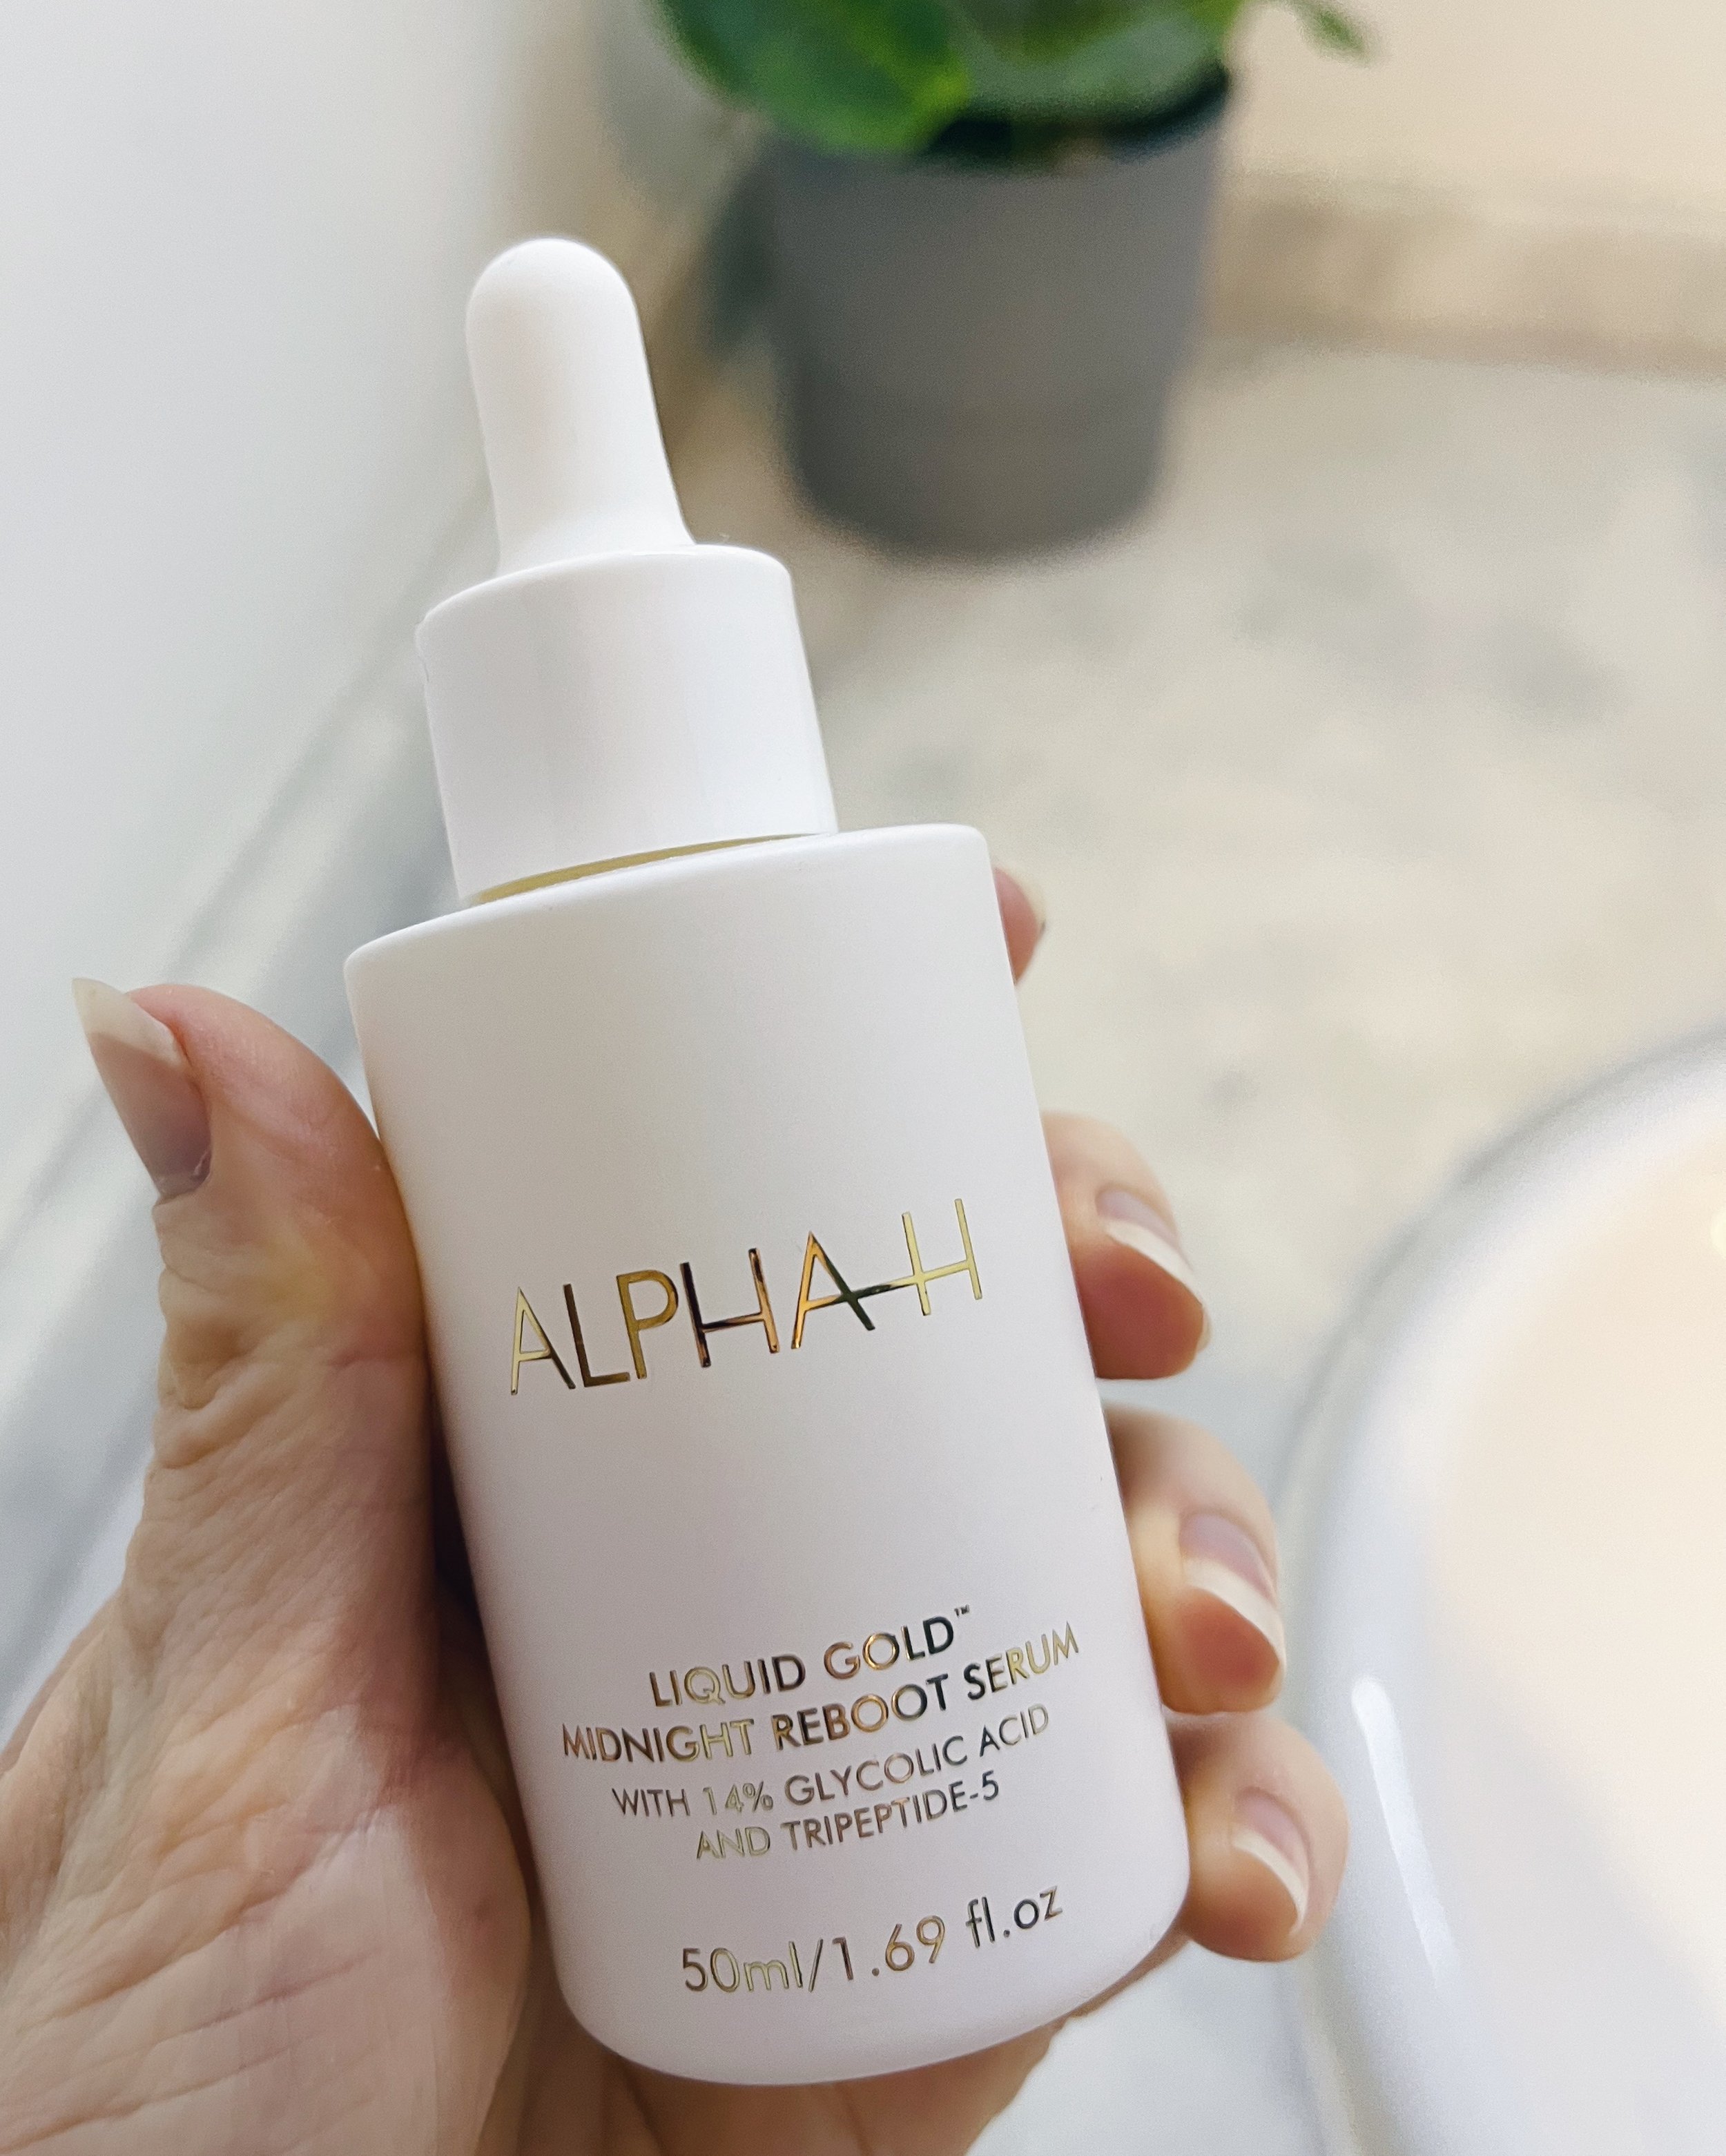 Alpha-H Liquid Gold review: Is it worth the money?